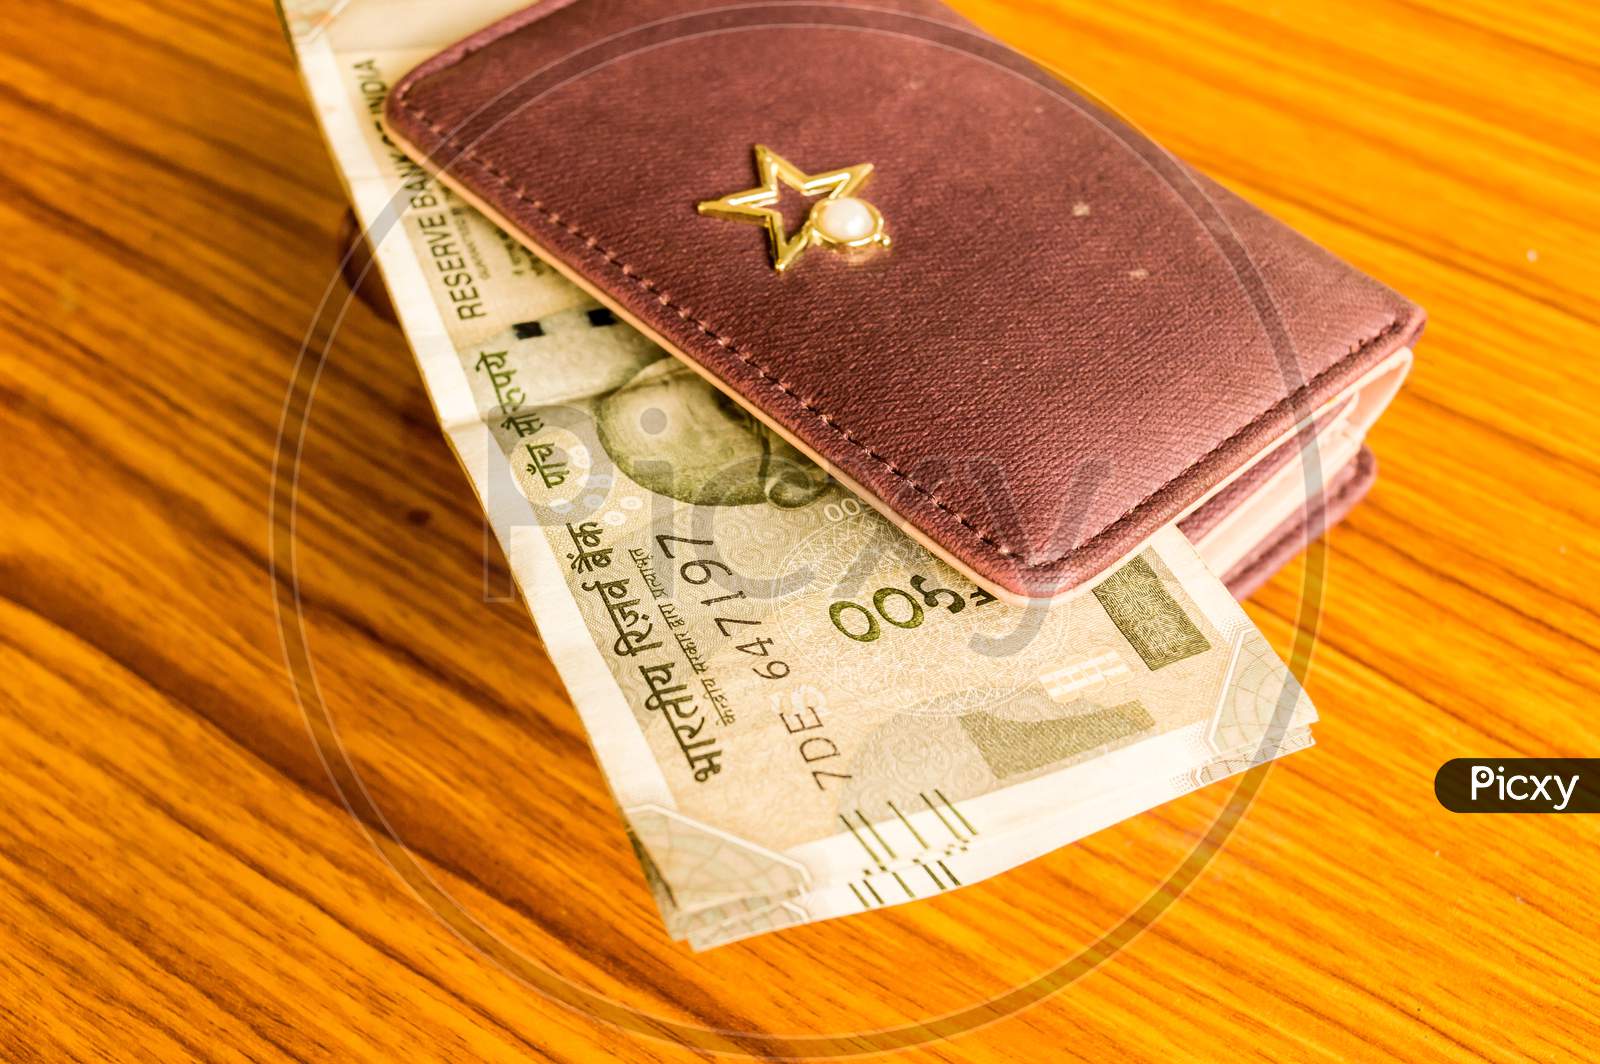 Indian Five Hundred (500) Rupee Cash Note In Brown Color Wallet Leather Purse On A Wooden Table. Business Finance Economy Concept. Side Angel View With Copy Space Room For Text On Left Side Of Image.